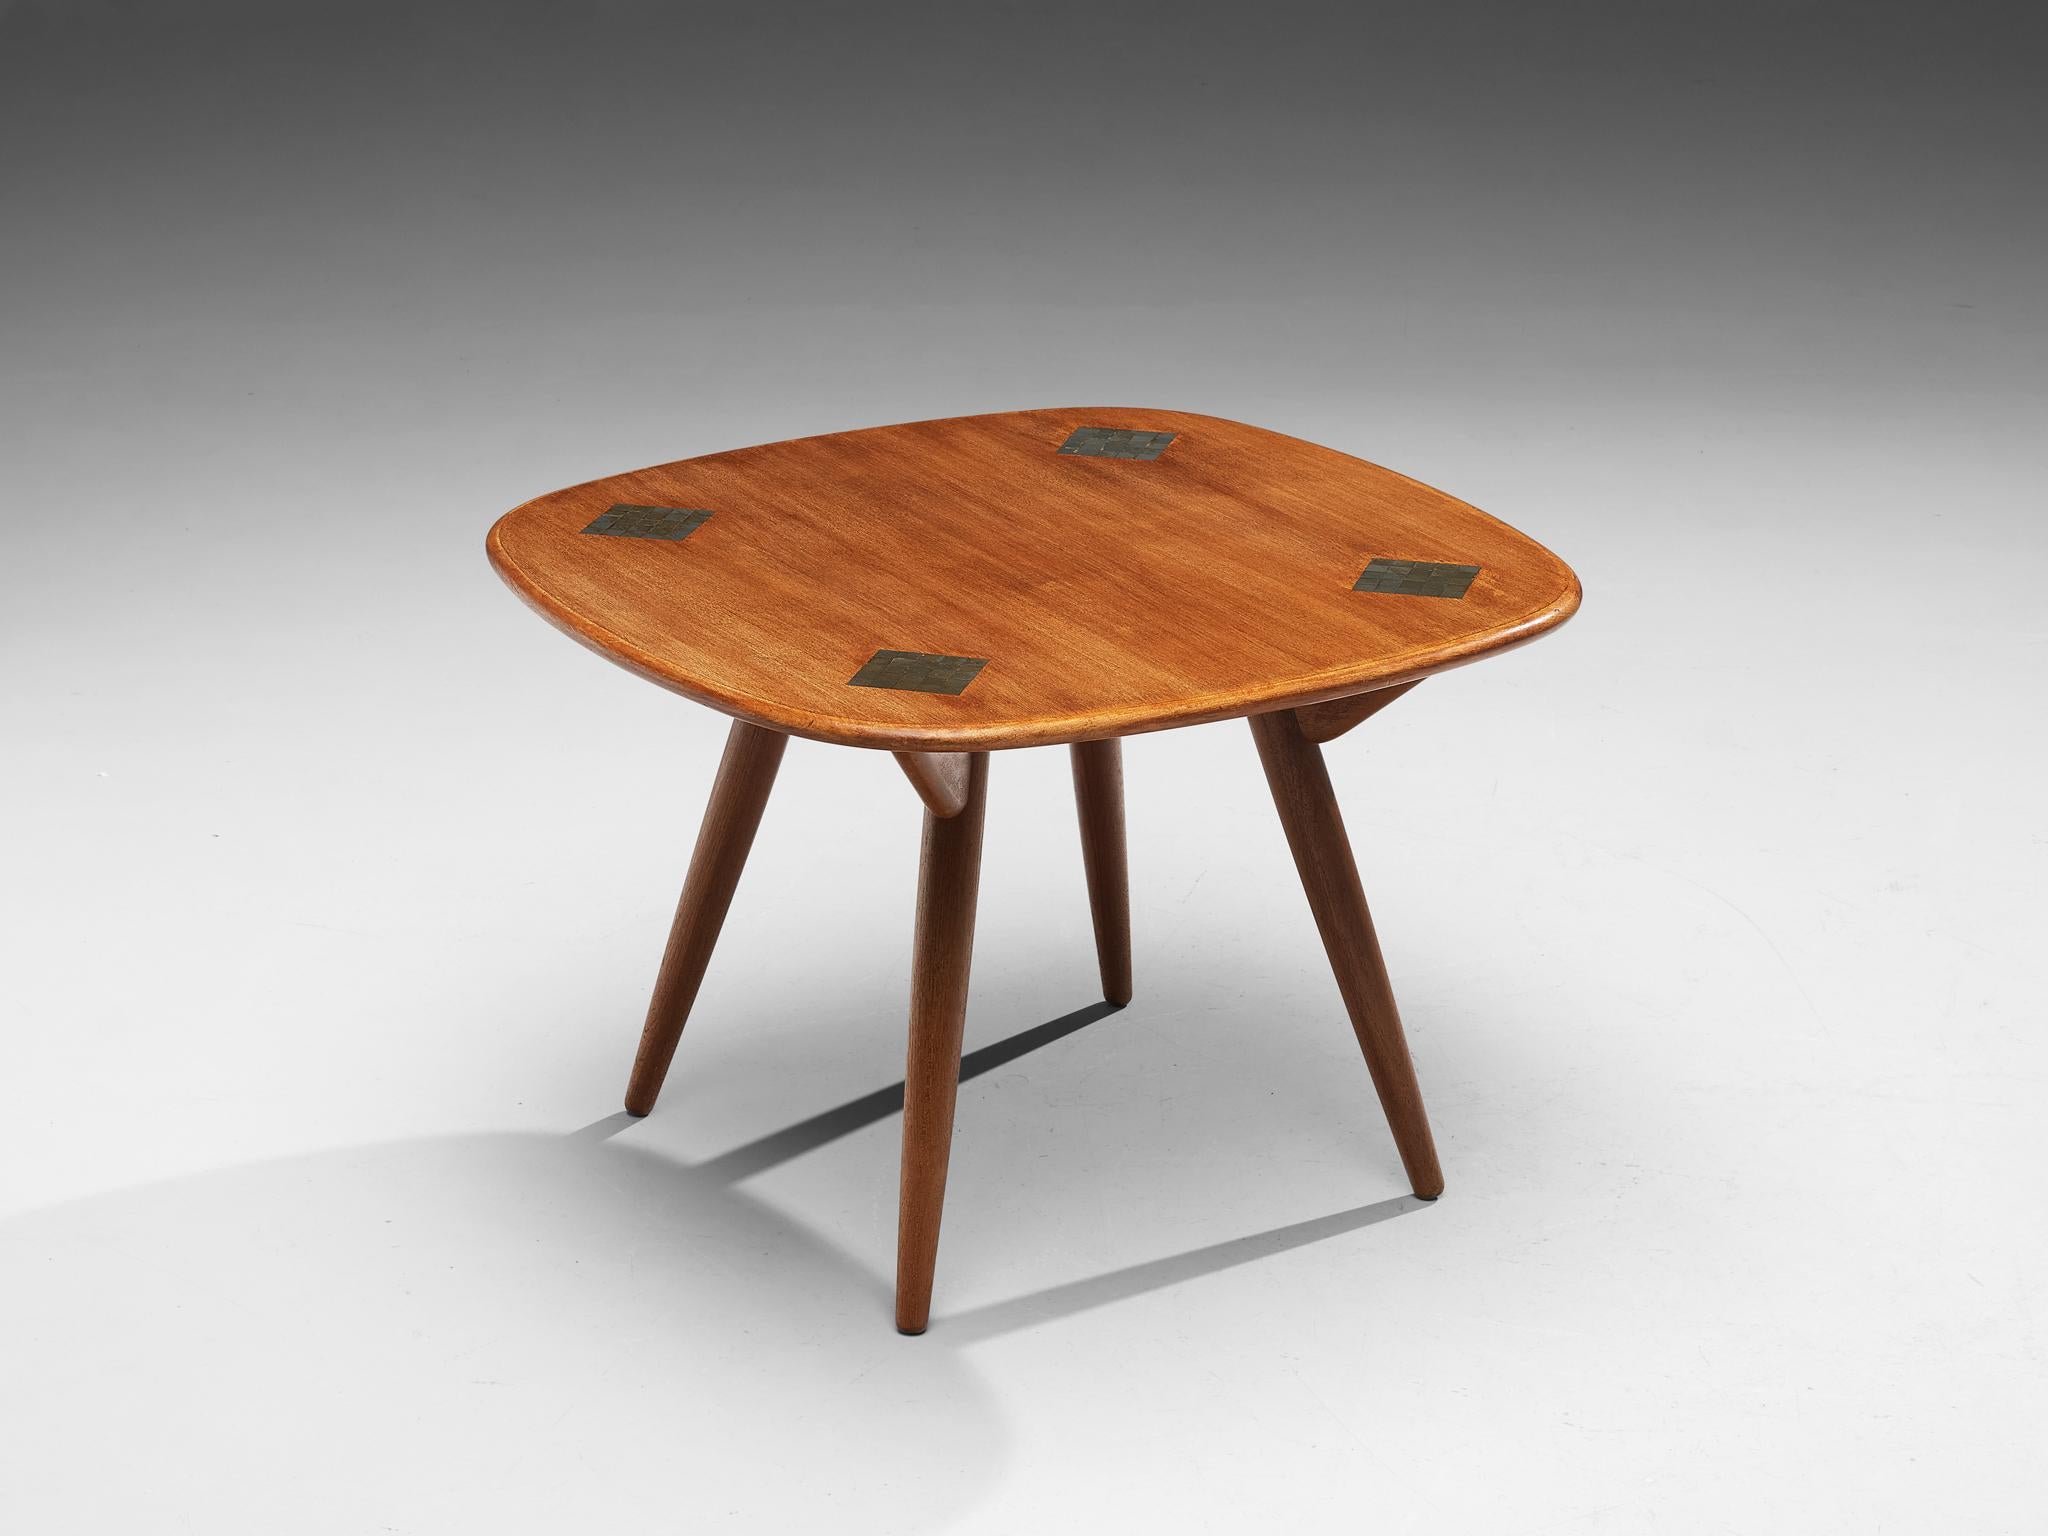 Side table, teak, ceramics, Europe, 1950s

Squared side table with ceramic inlays. This mid-century coffee or side table features a distinctly shaped top. The square has rounded corners and four ceramic inlays. Here, small mosaic fragments form